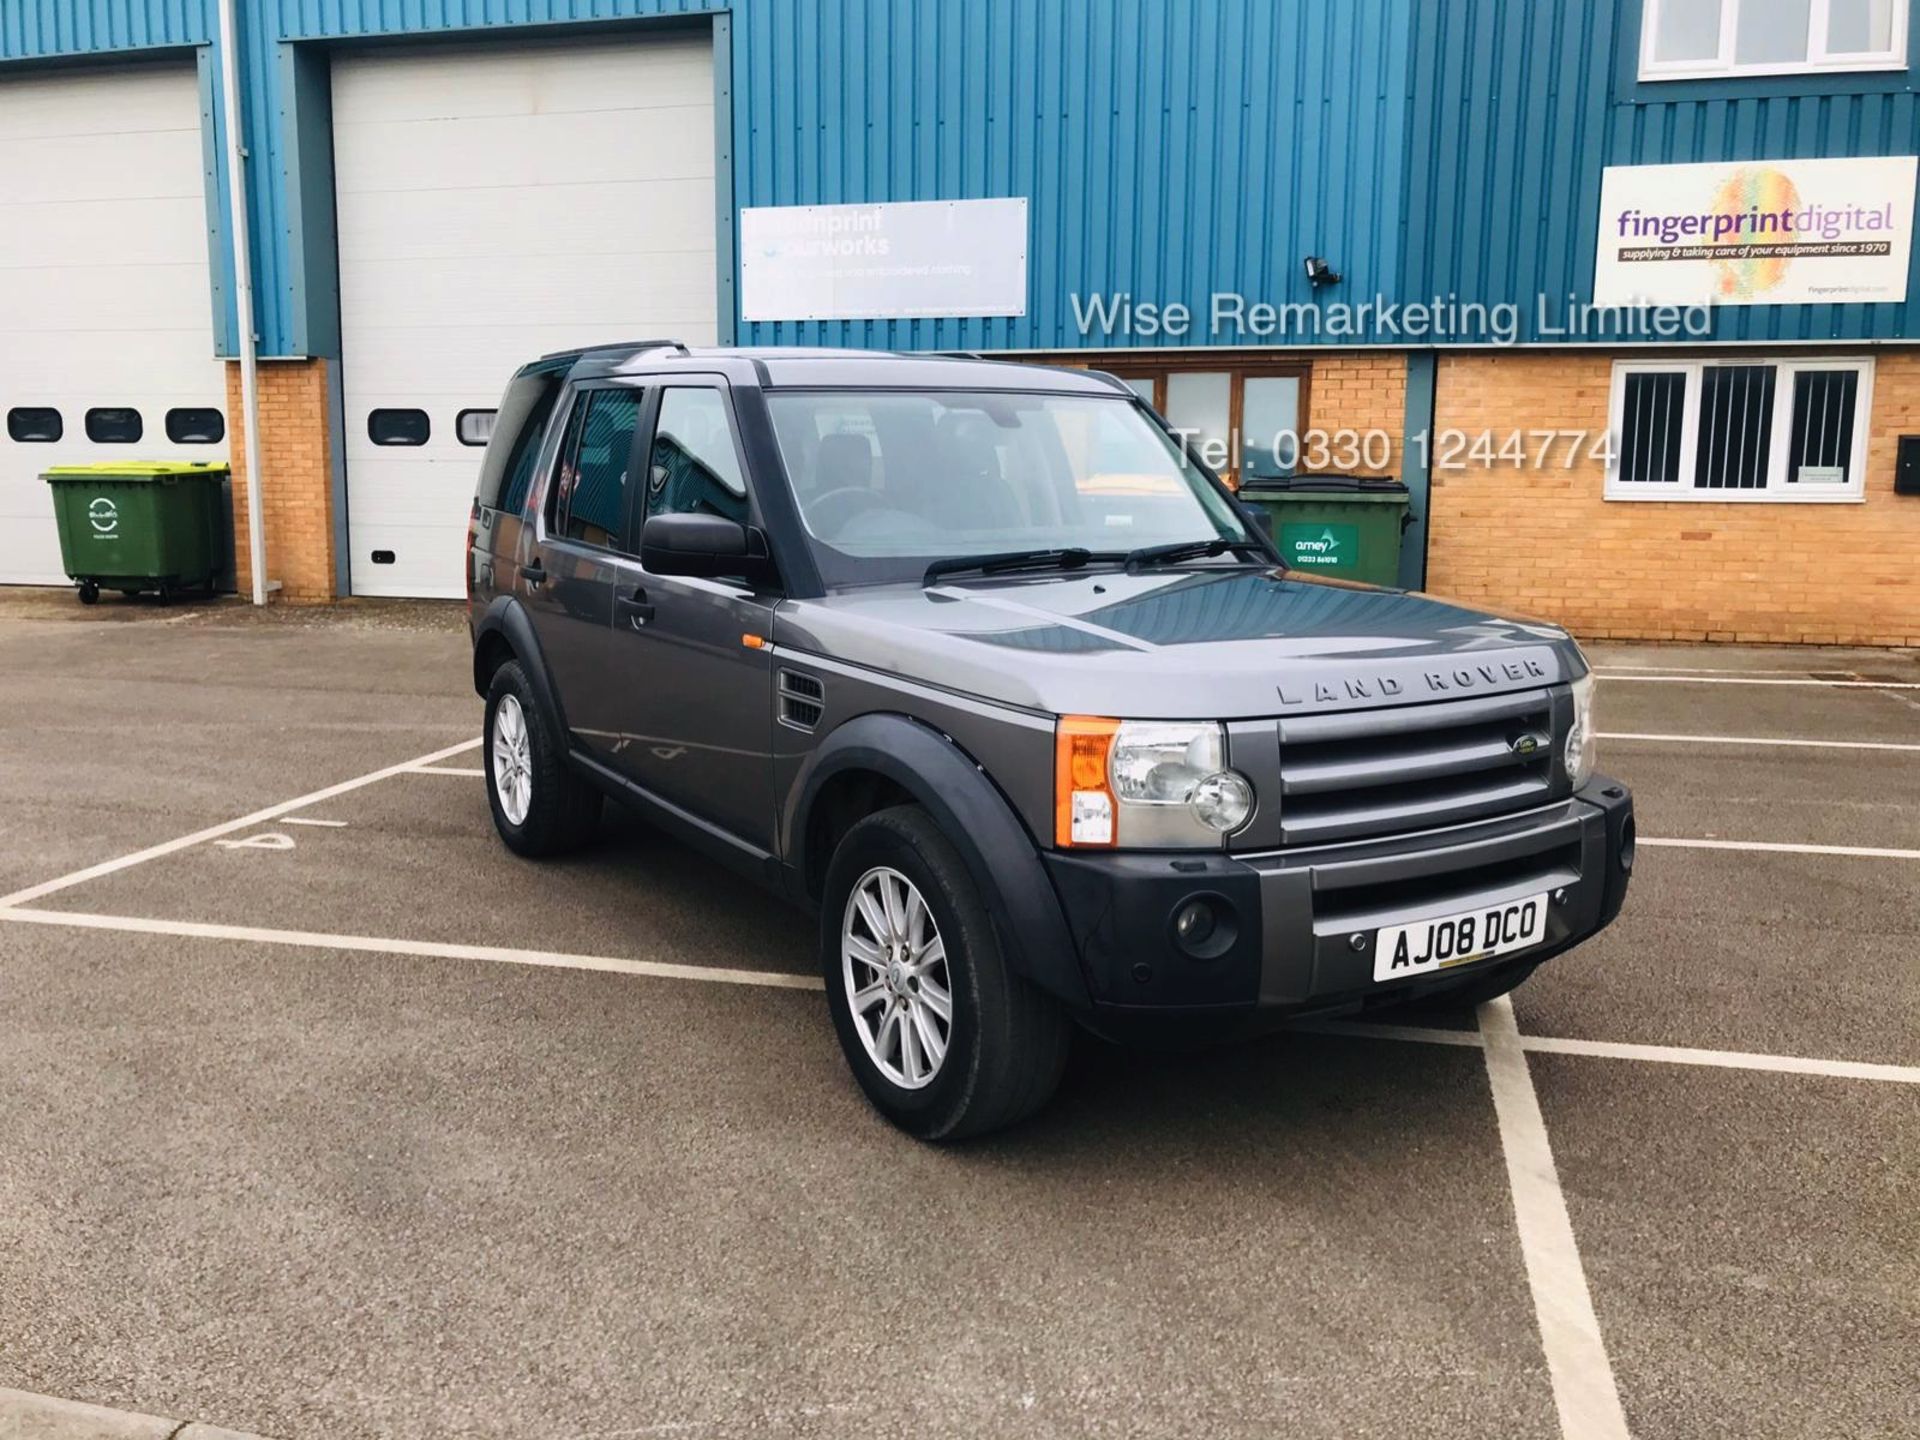 Land Rover Discovery SE 2.7 TDV6 Automatic - 2008 08 Reg - 7 seats - 1 Keeper - Service History - Image 2 of 22